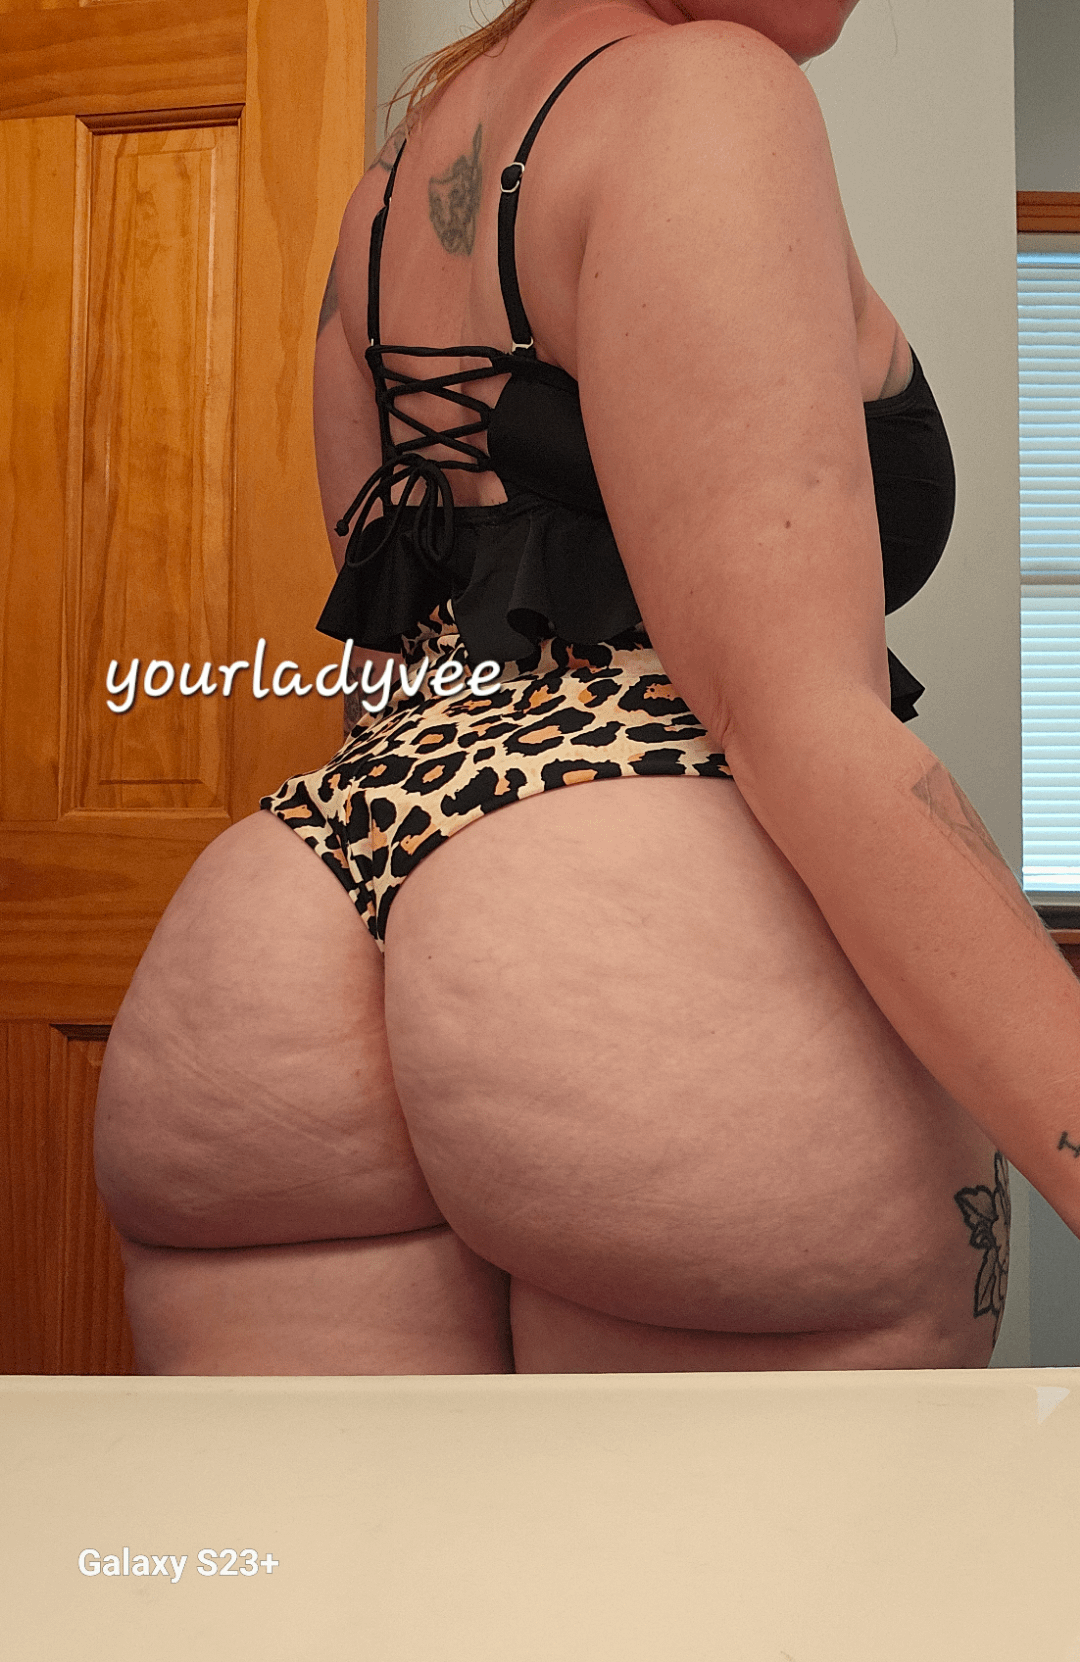 PAWG This PAWG misses the beach